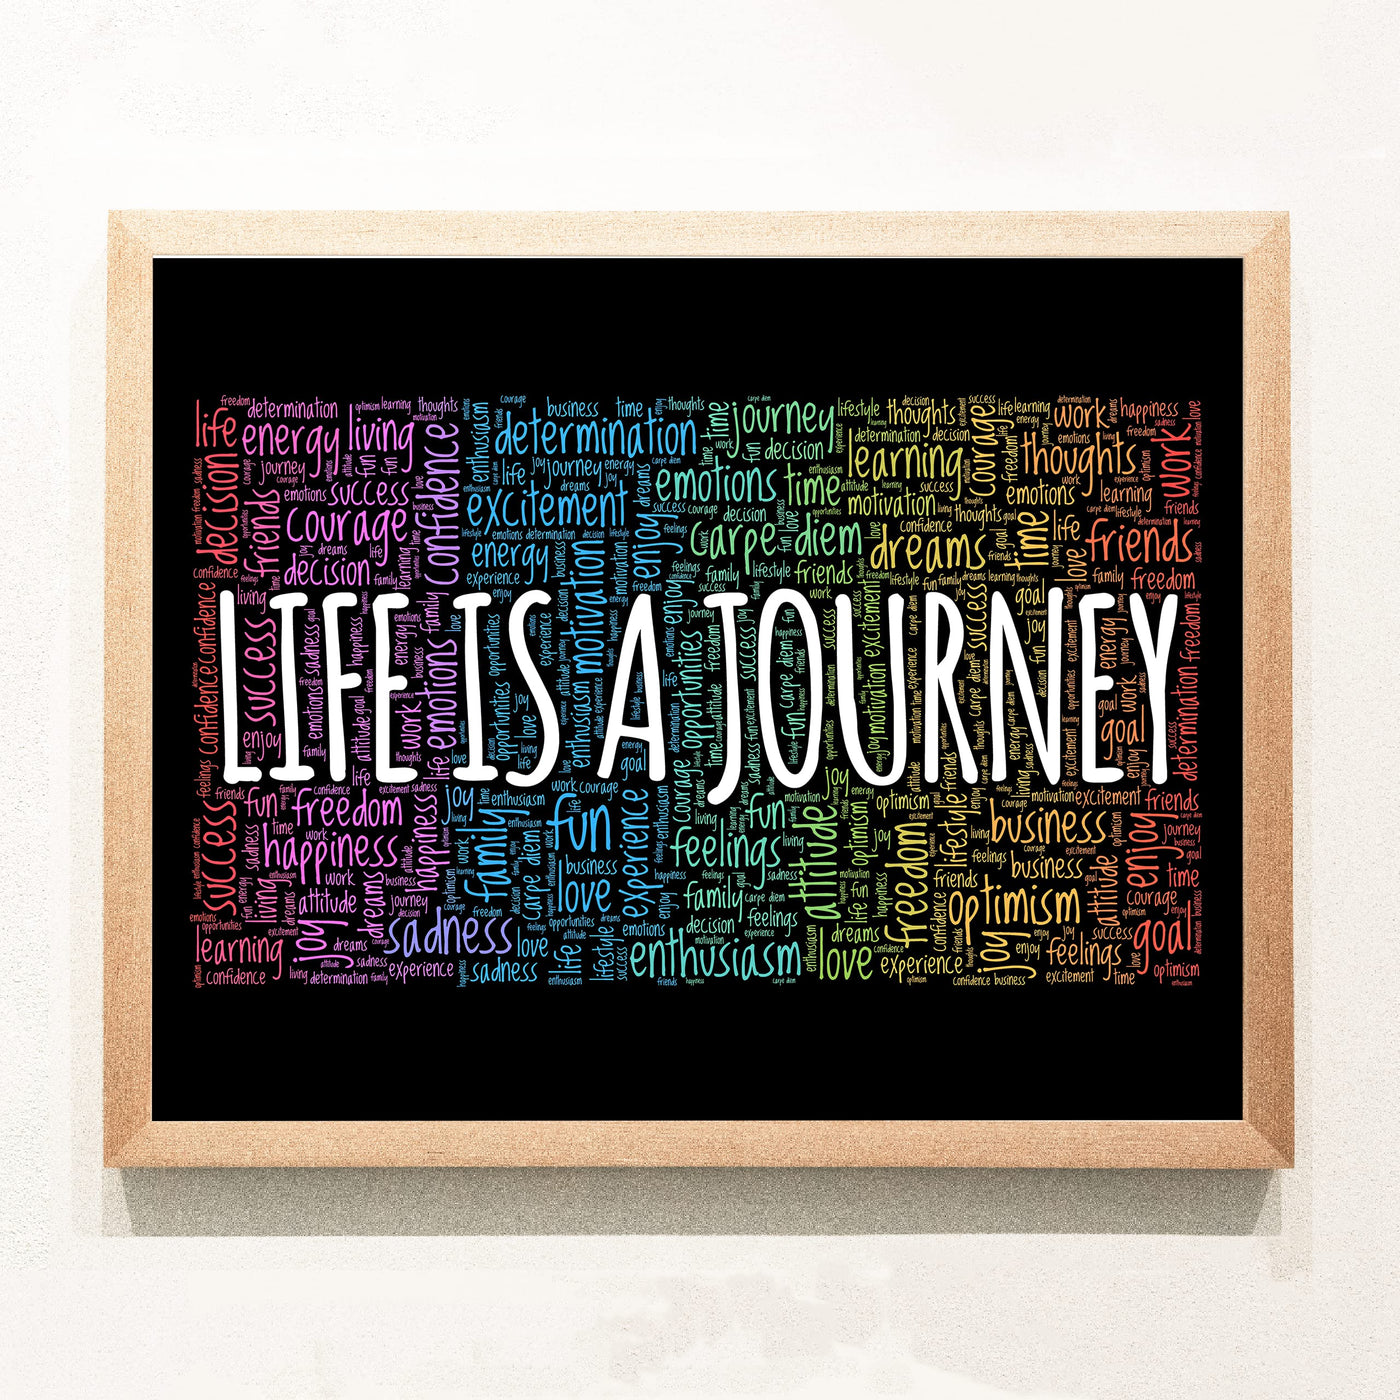 "Life Is A Journey" Inspirational Quotes Wall Decor -14 x 11" Motivational Word Art Print -Ready to Frame. Home-Office-Classroom-Work Decor. Encouraging Words for Motivation & Inspiration!